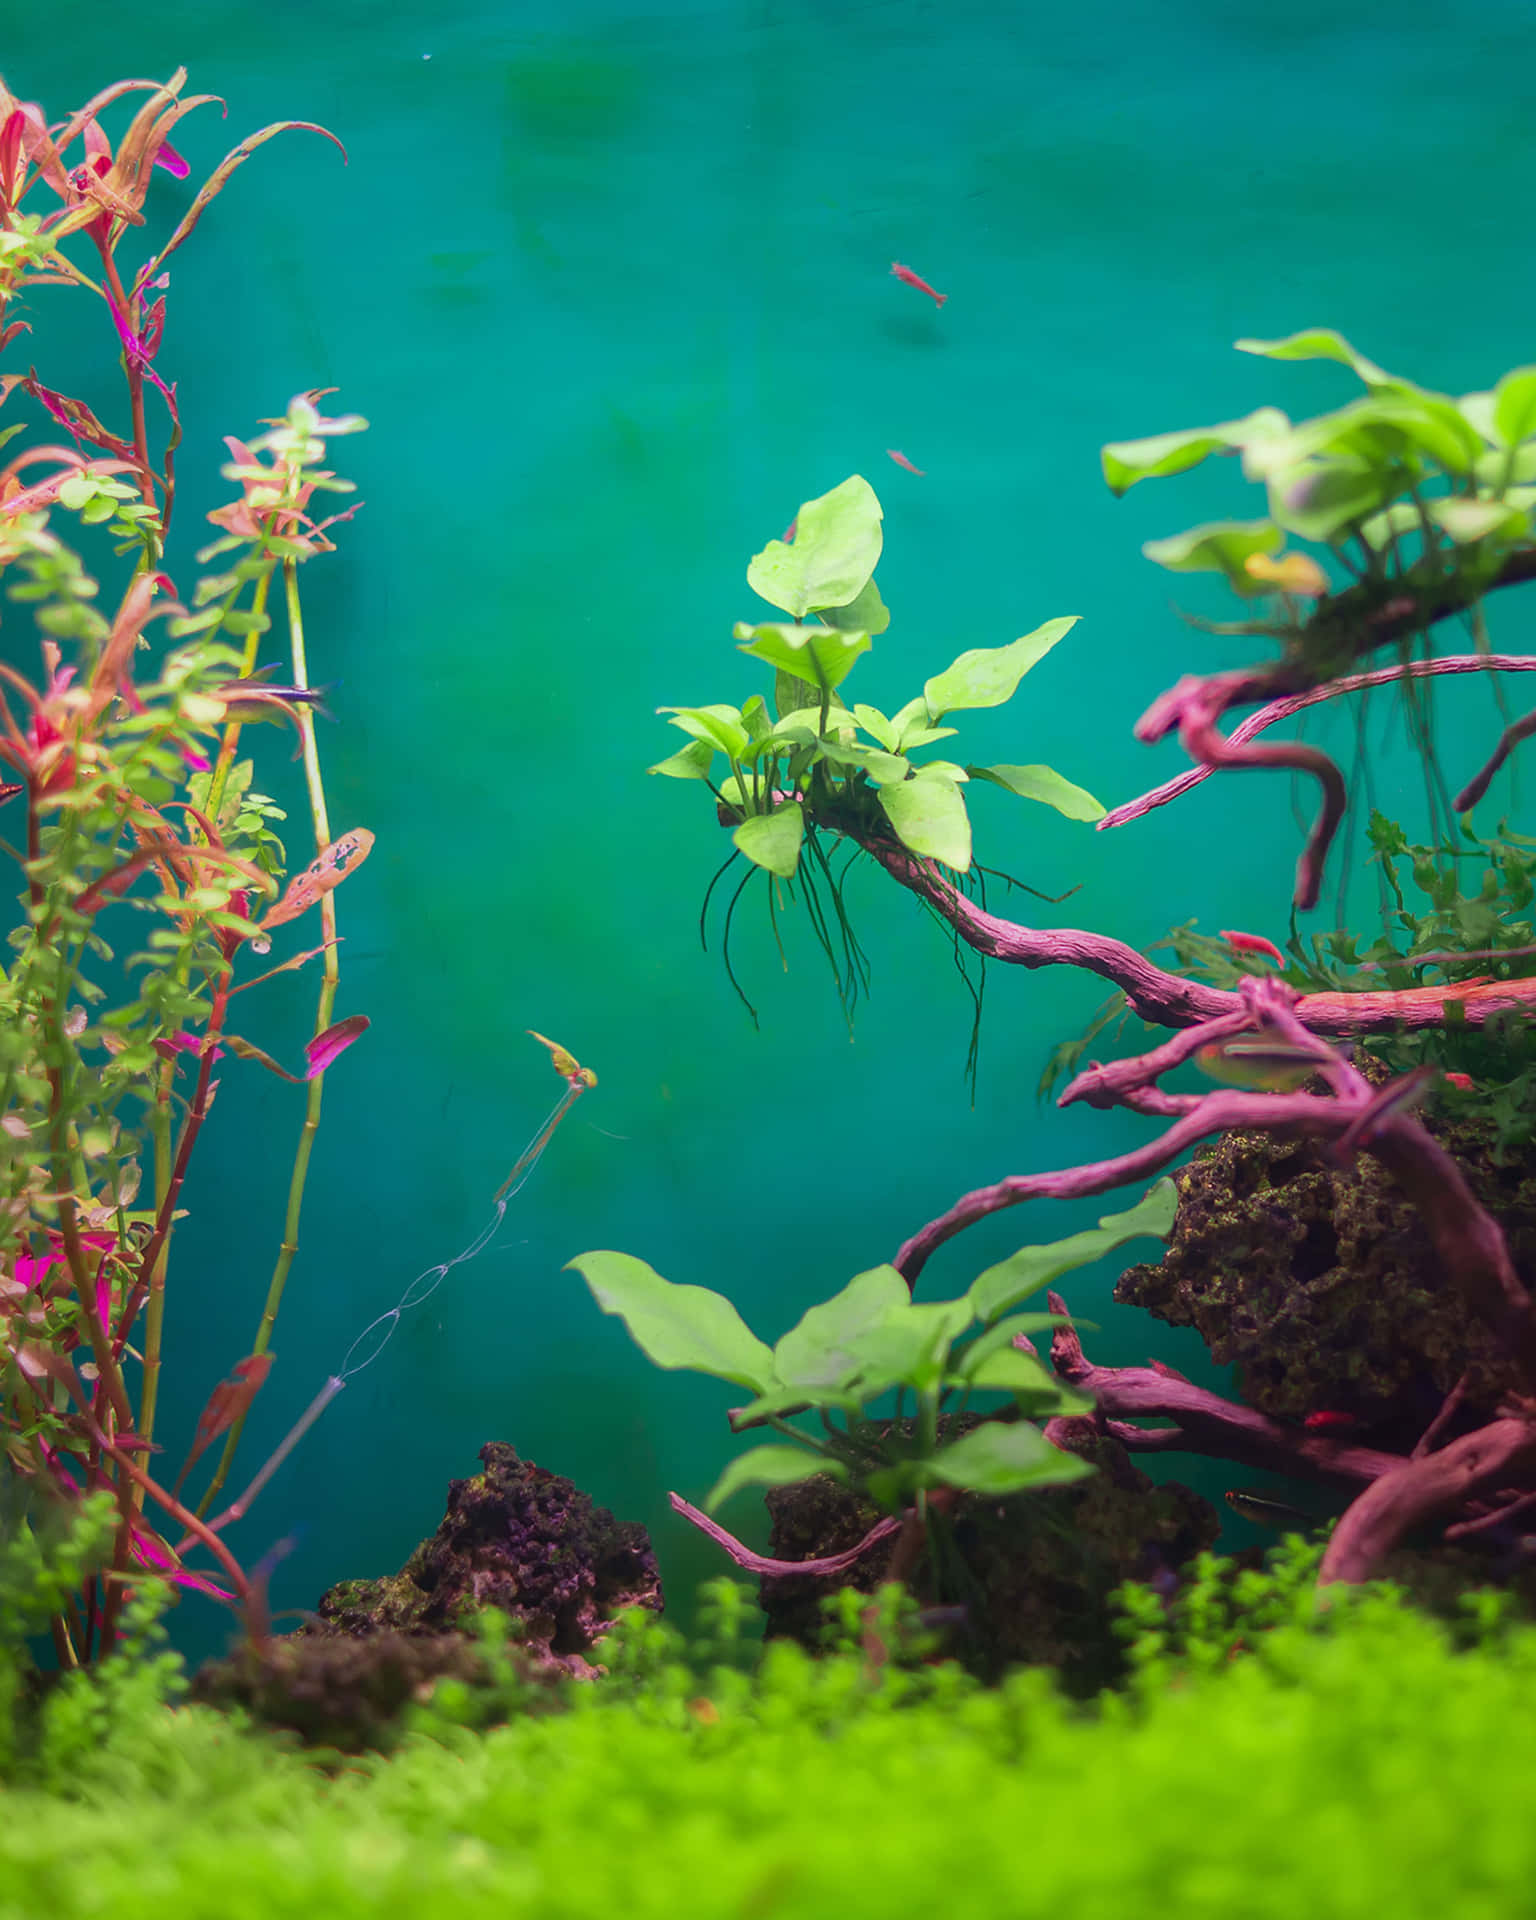 Beautiful aquarium on table against color background :: Stock Photography  Agency :: Pixel-Shot Studio